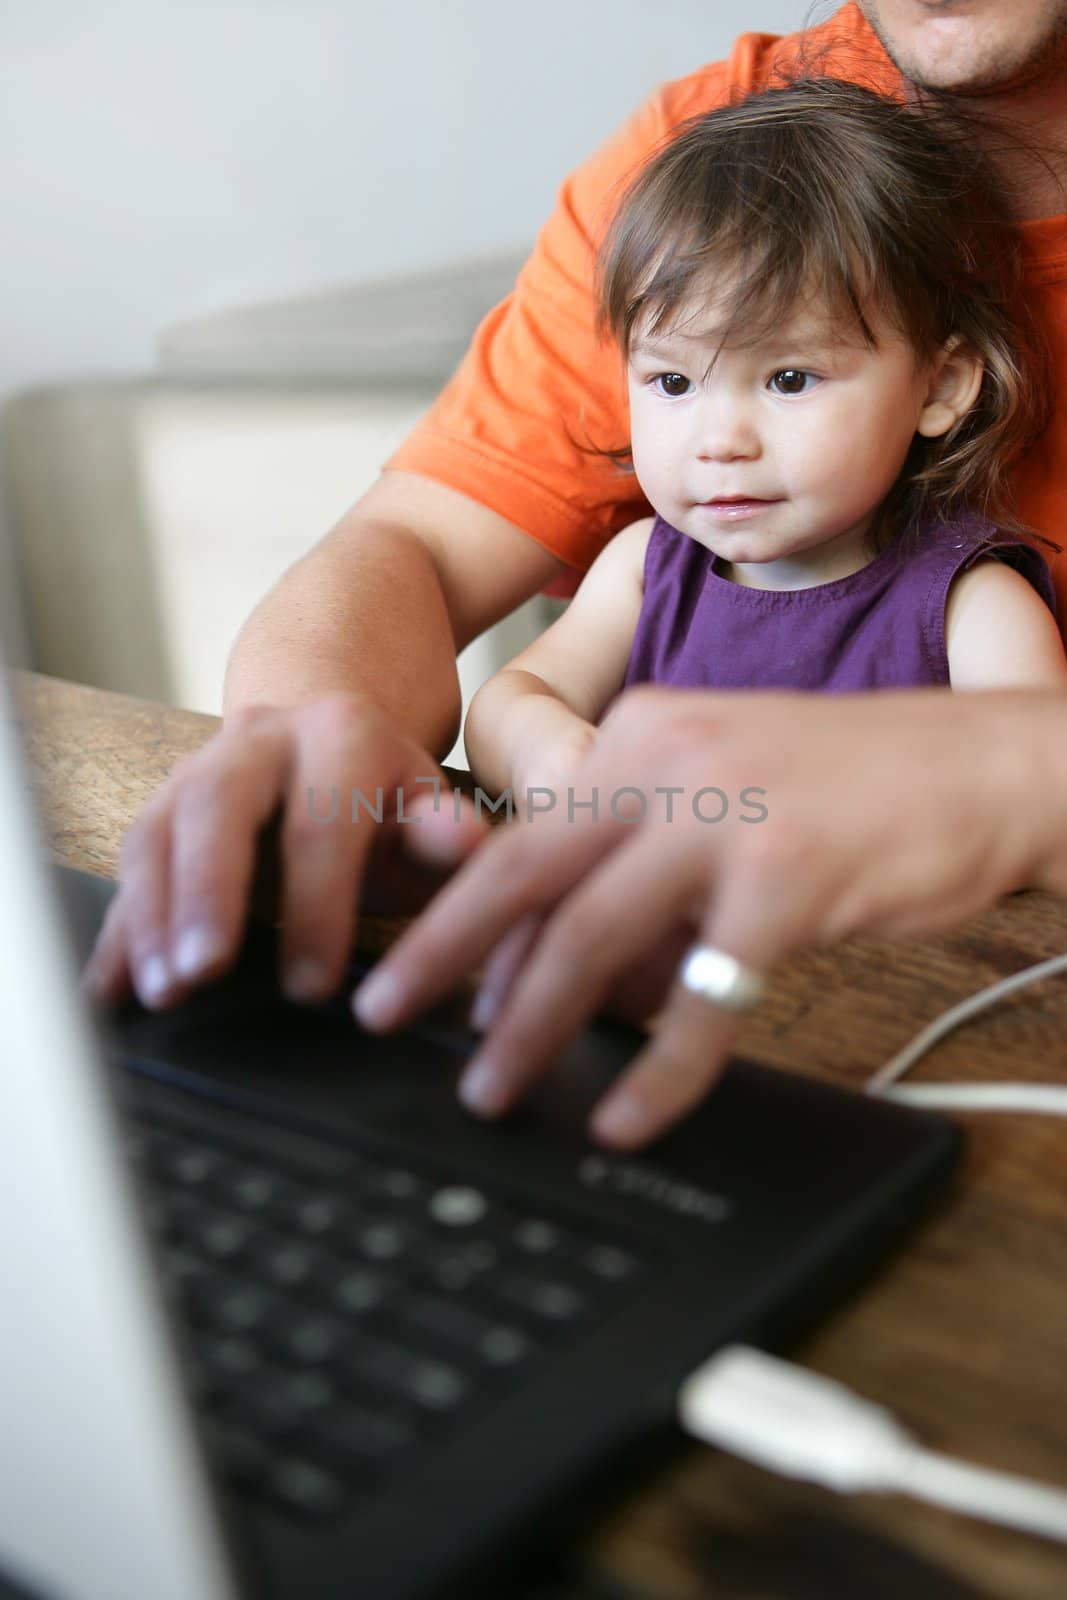 Father and daughter using computer